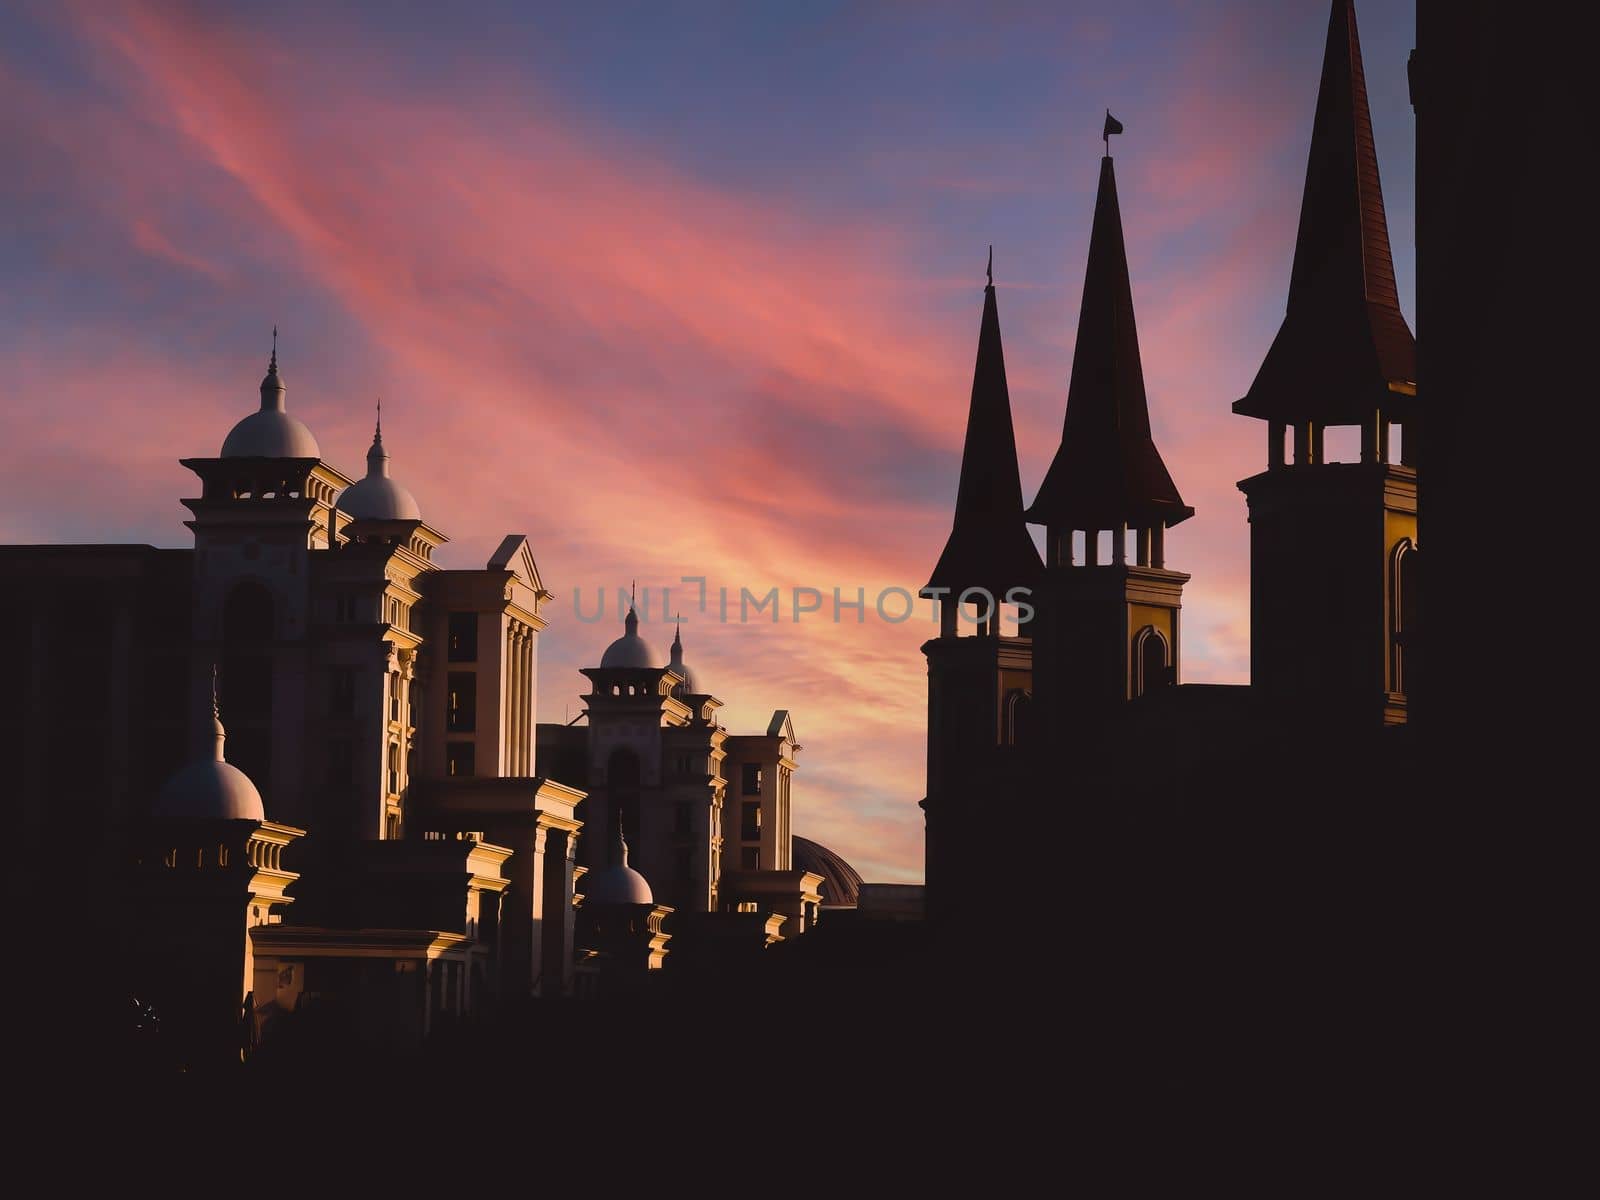 View of several black silhouettes of historic palace towers against a sunset orange sky and a sunbeam by Sonat